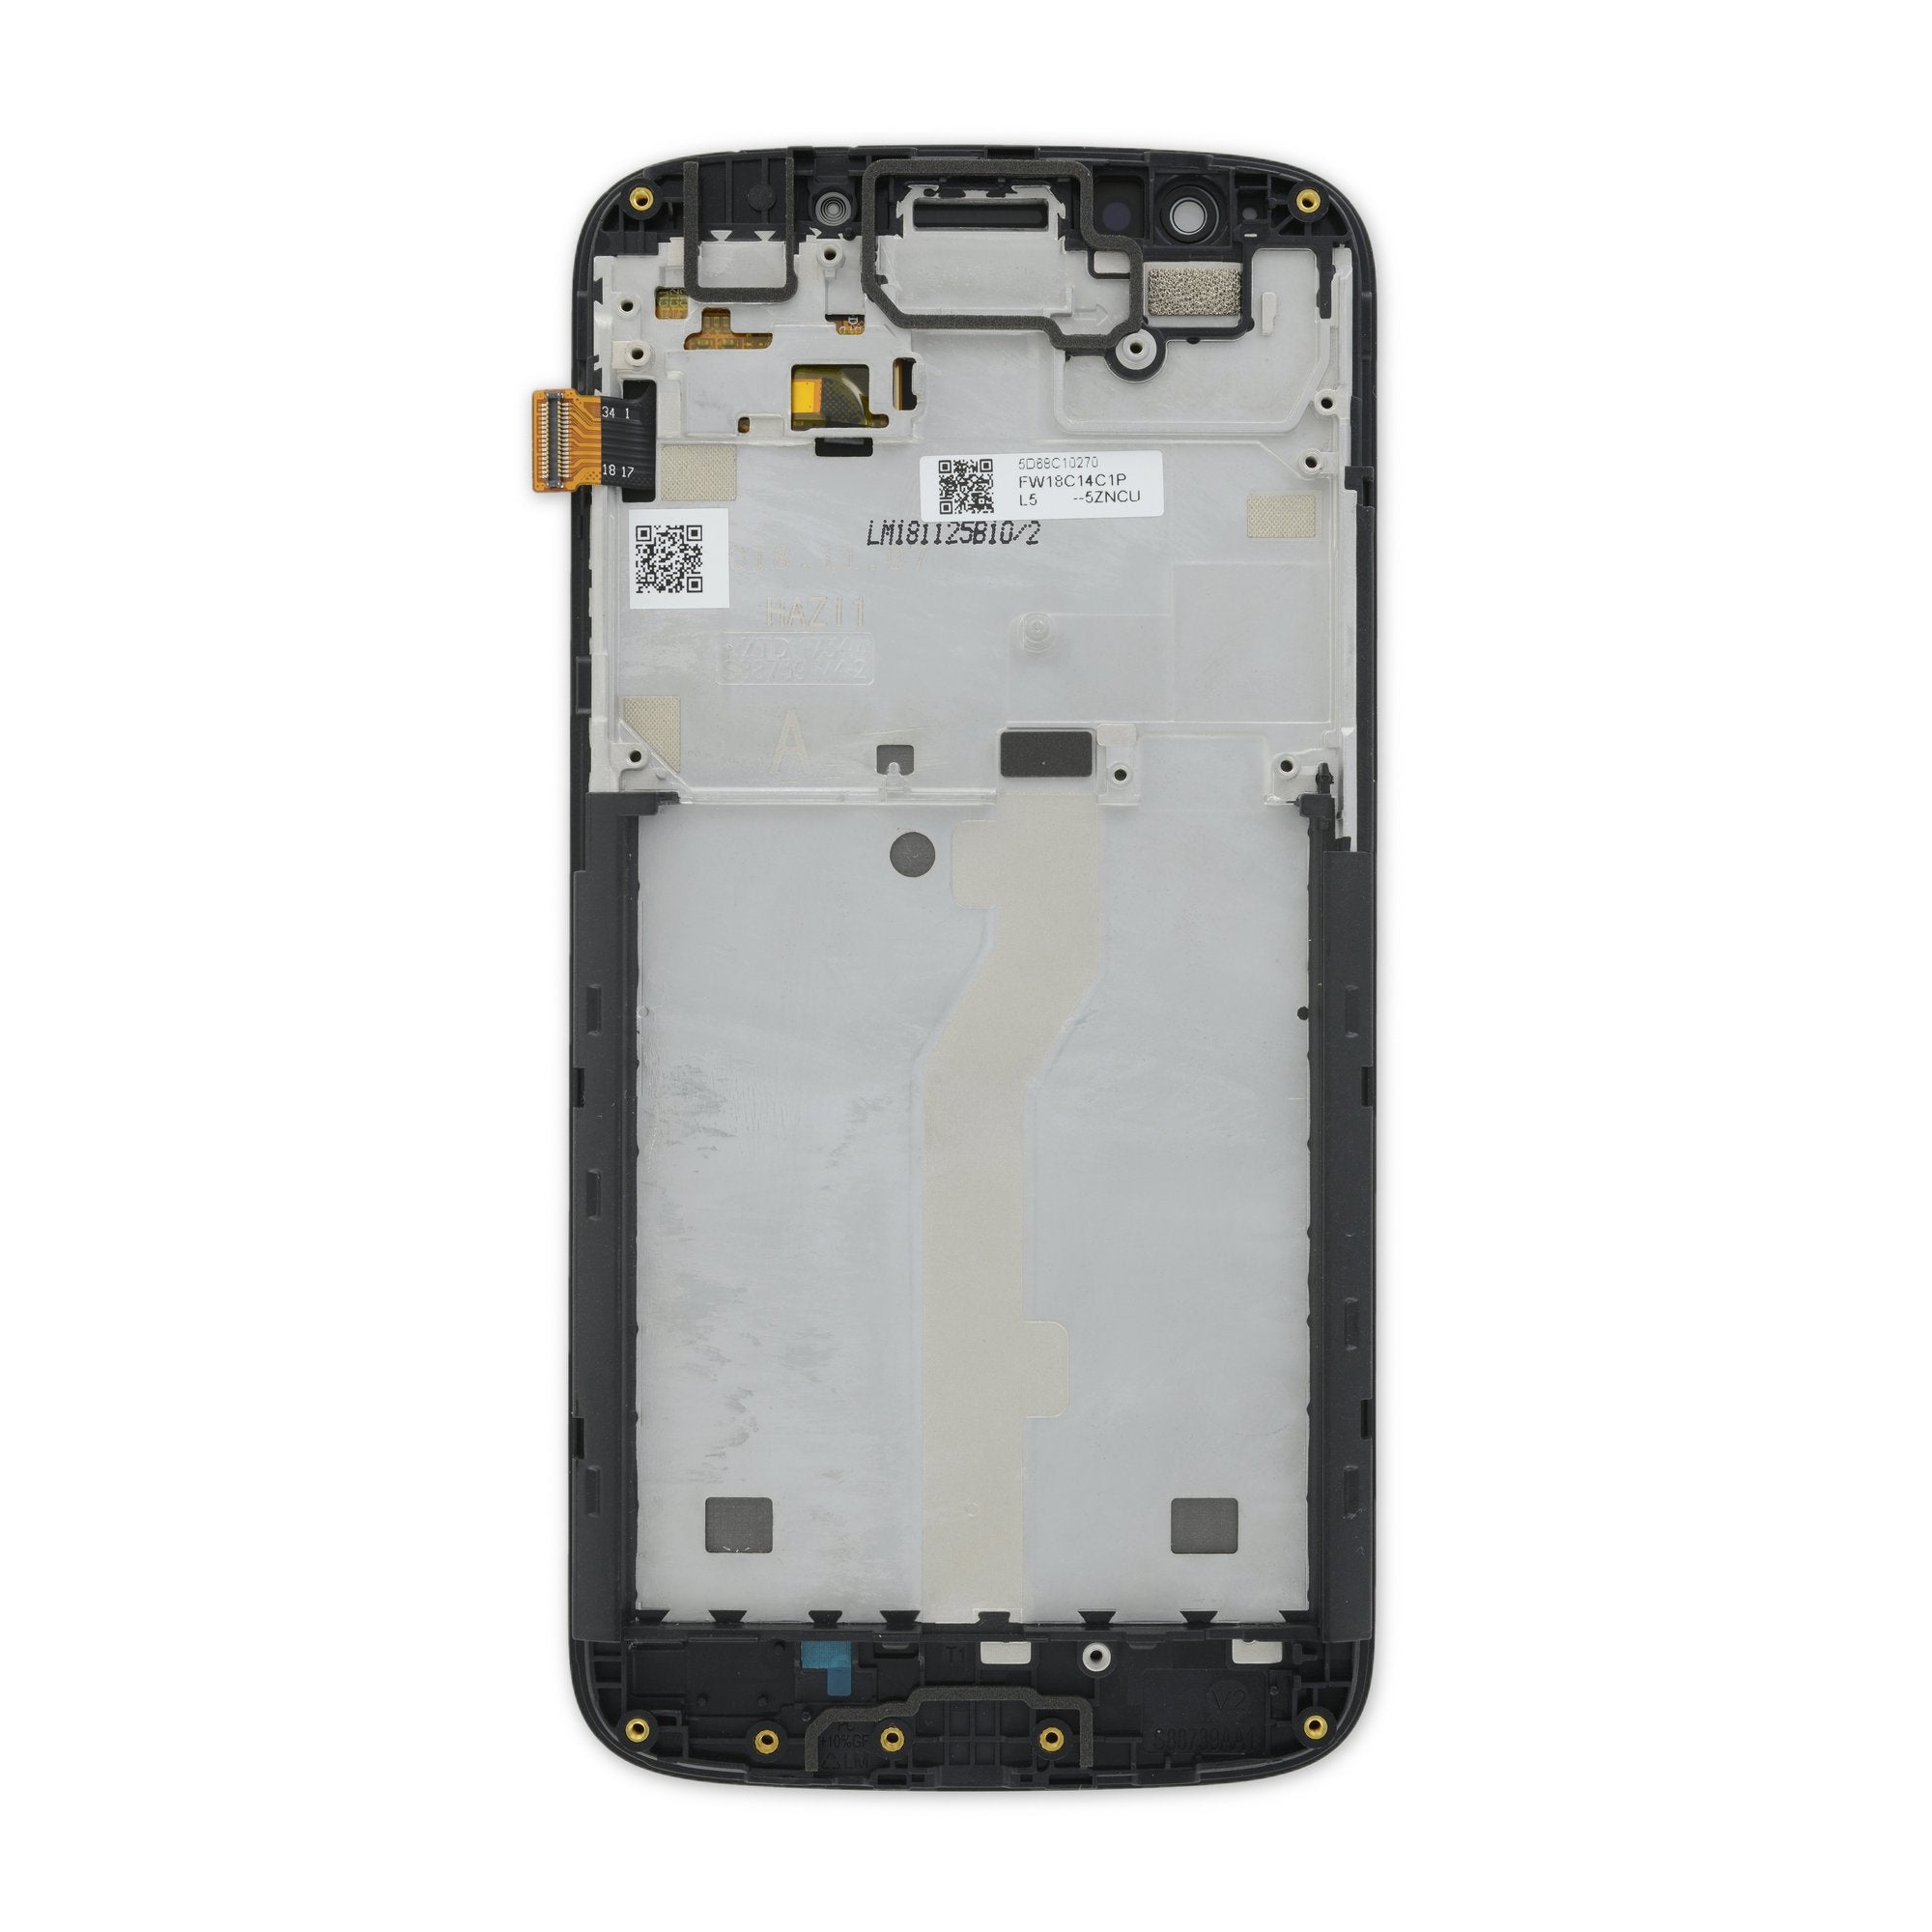 Moto E5 Play (XT1921) Screen - Genuine New Part Only